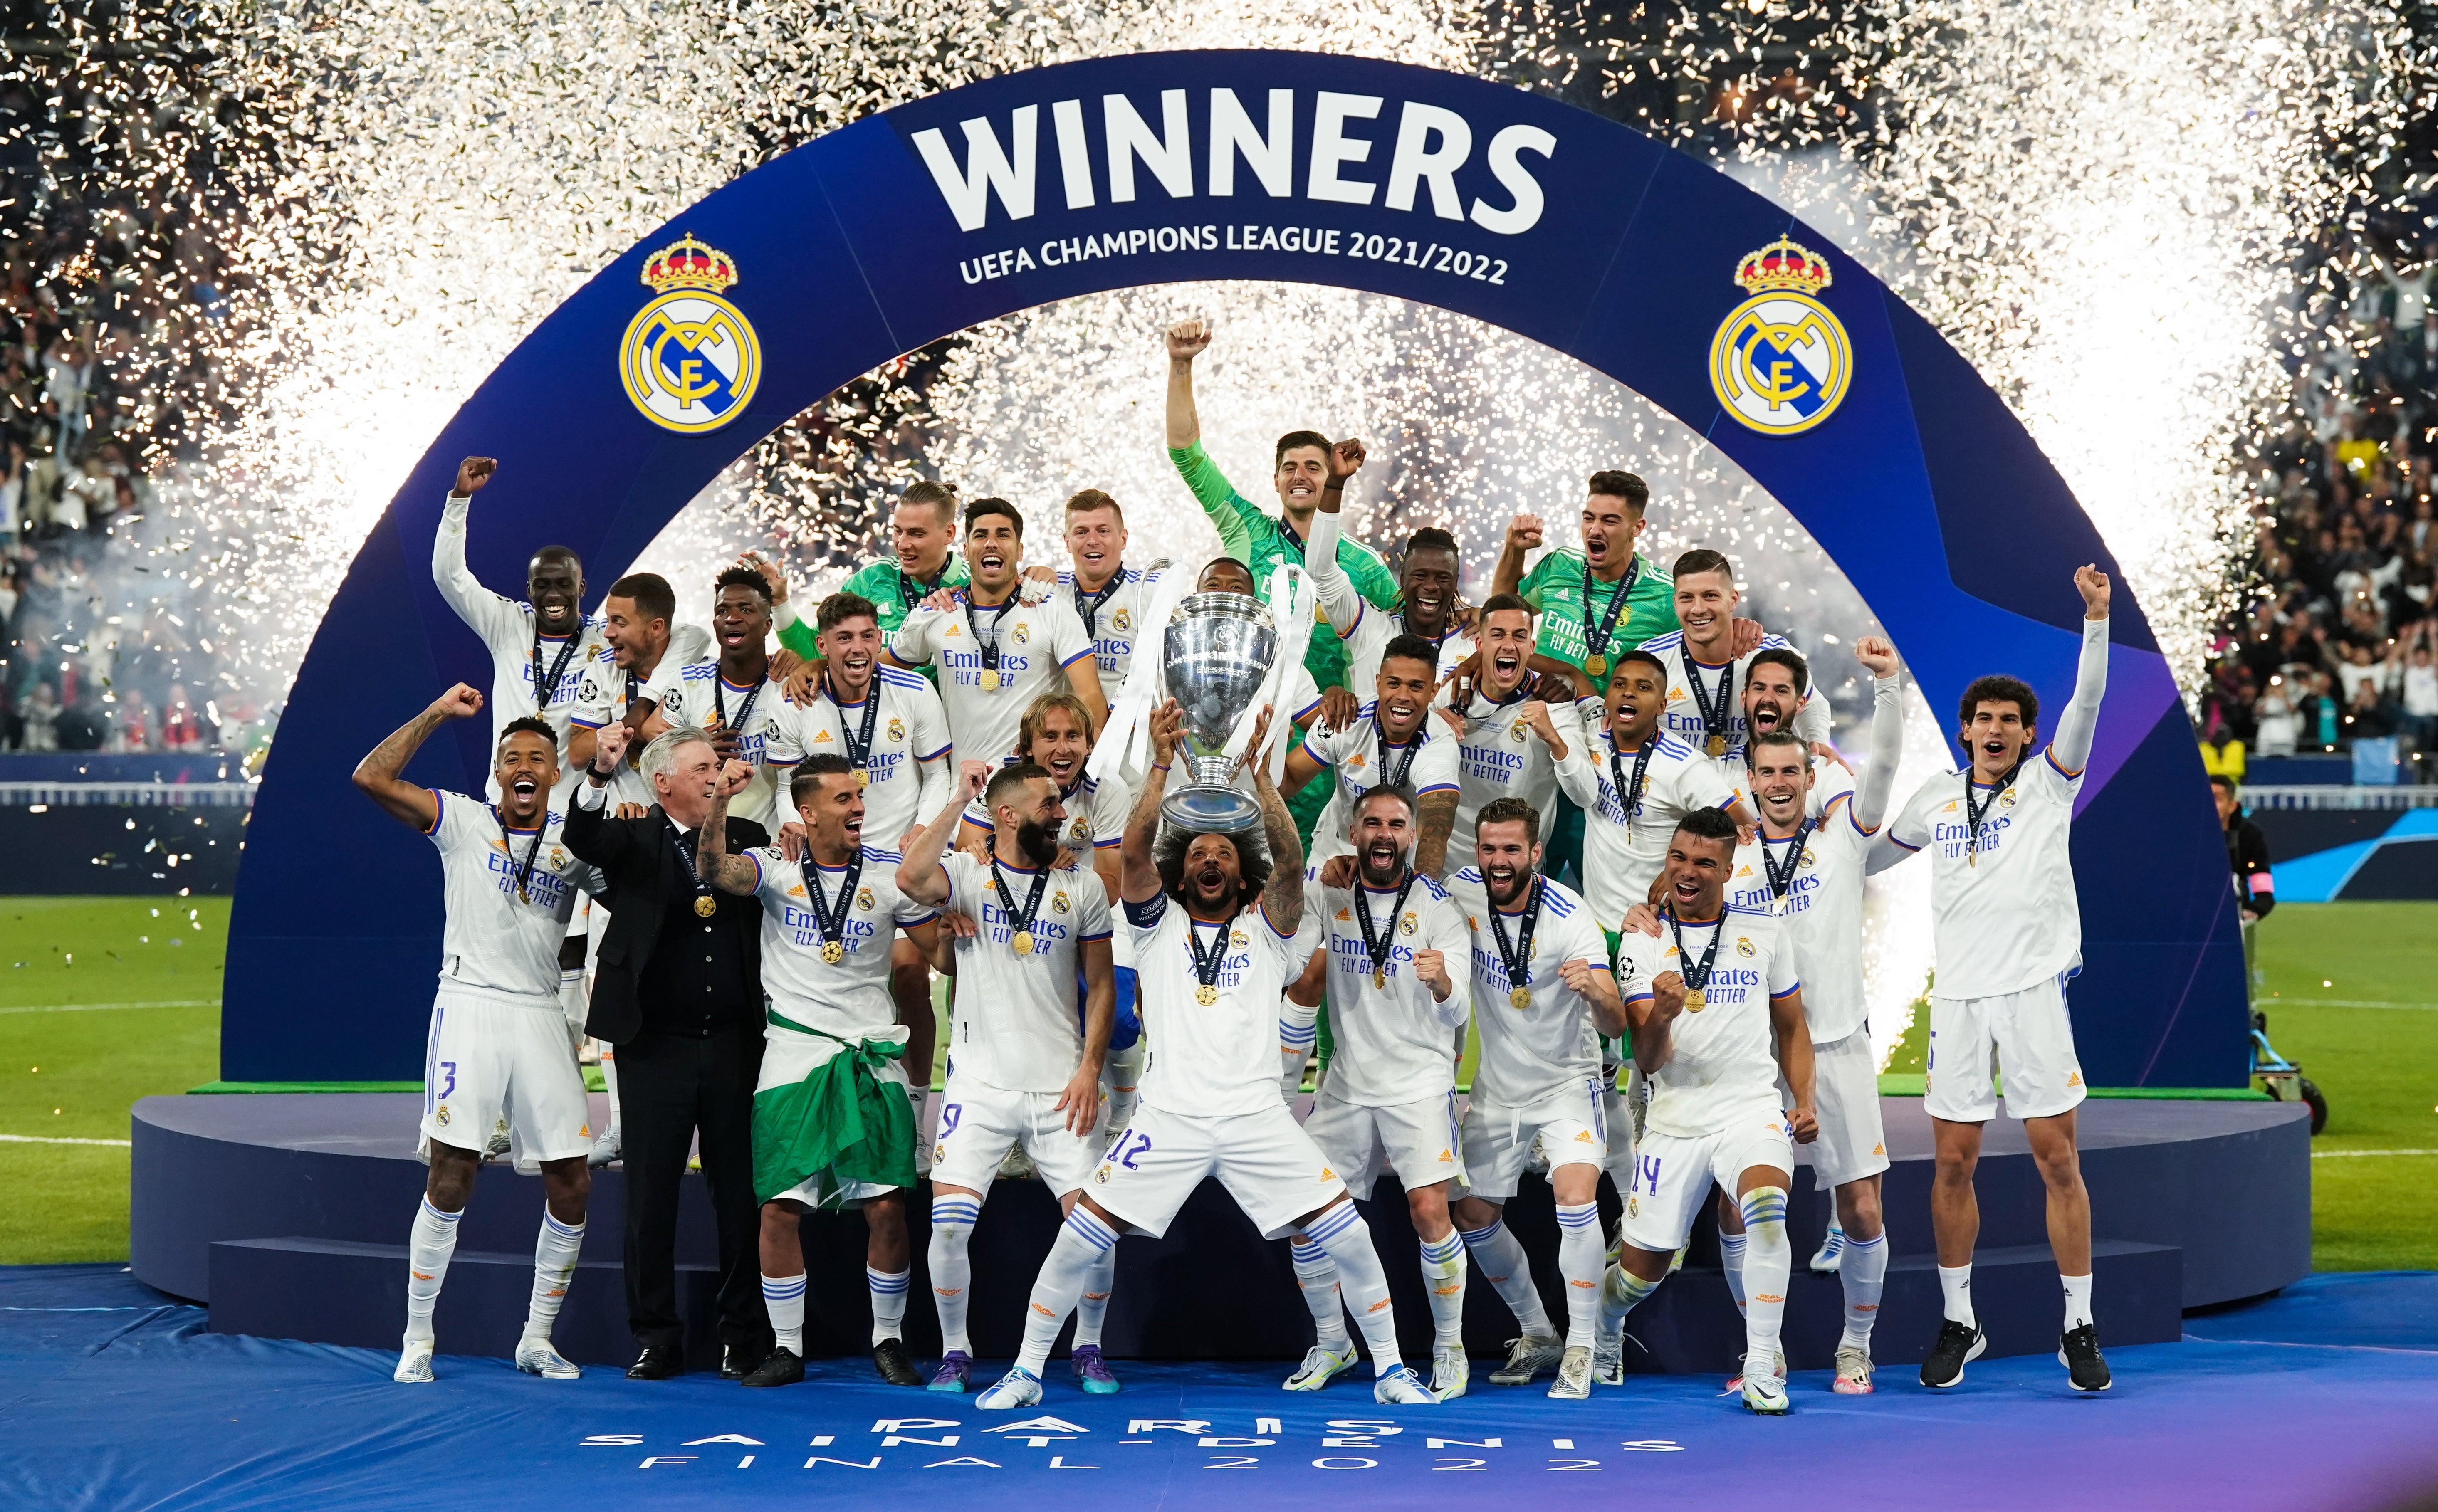 Real Madrid’s Marcelo lifts the trophy as they celebrate winning the Champions League against Liverpool (Nick Potts/PA)